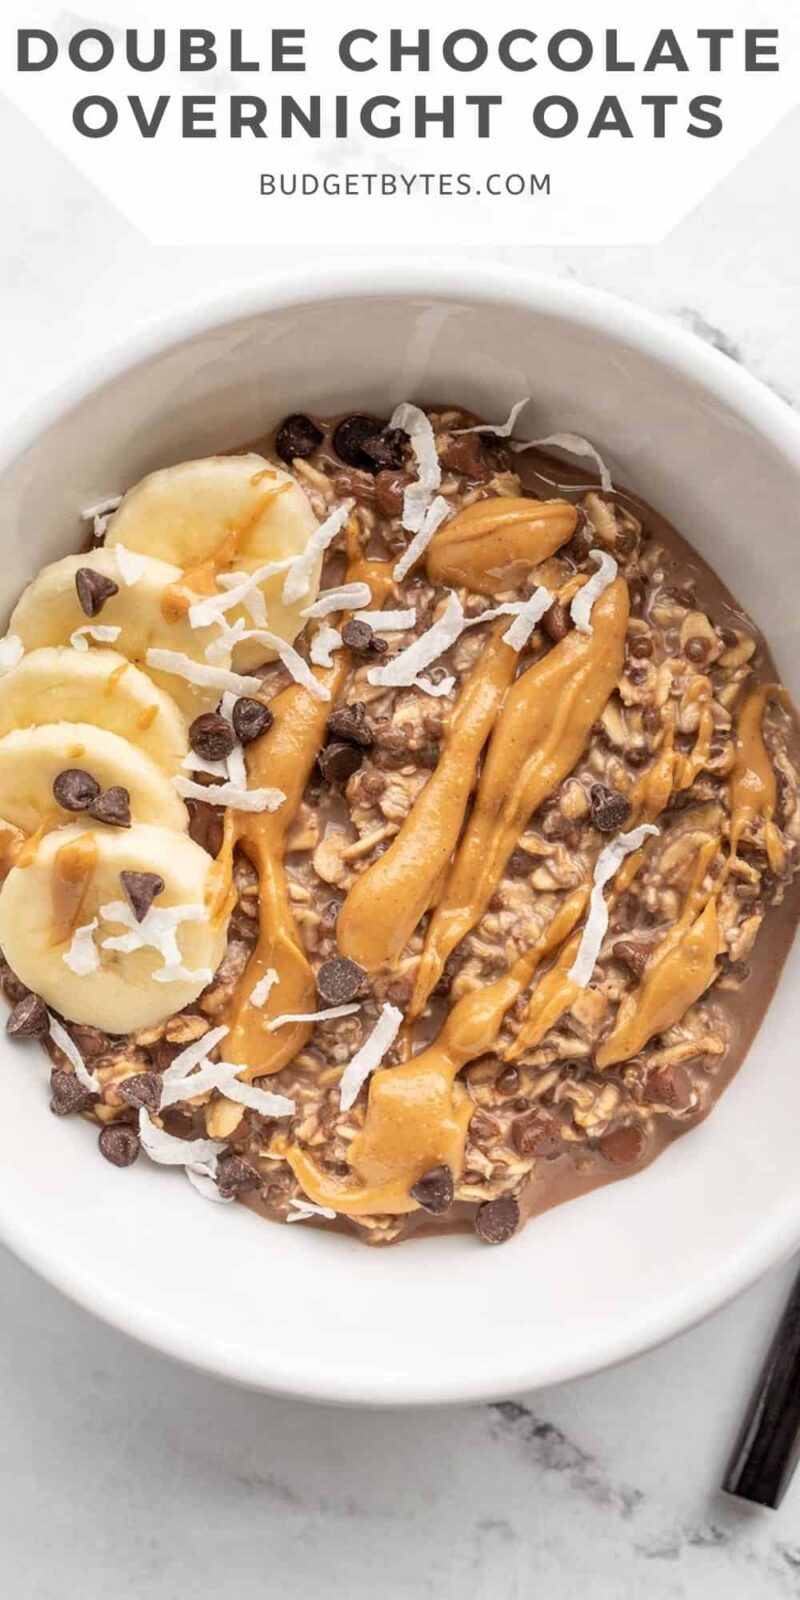 Overhead view of a bowl of chocolate overnight oats with toppings